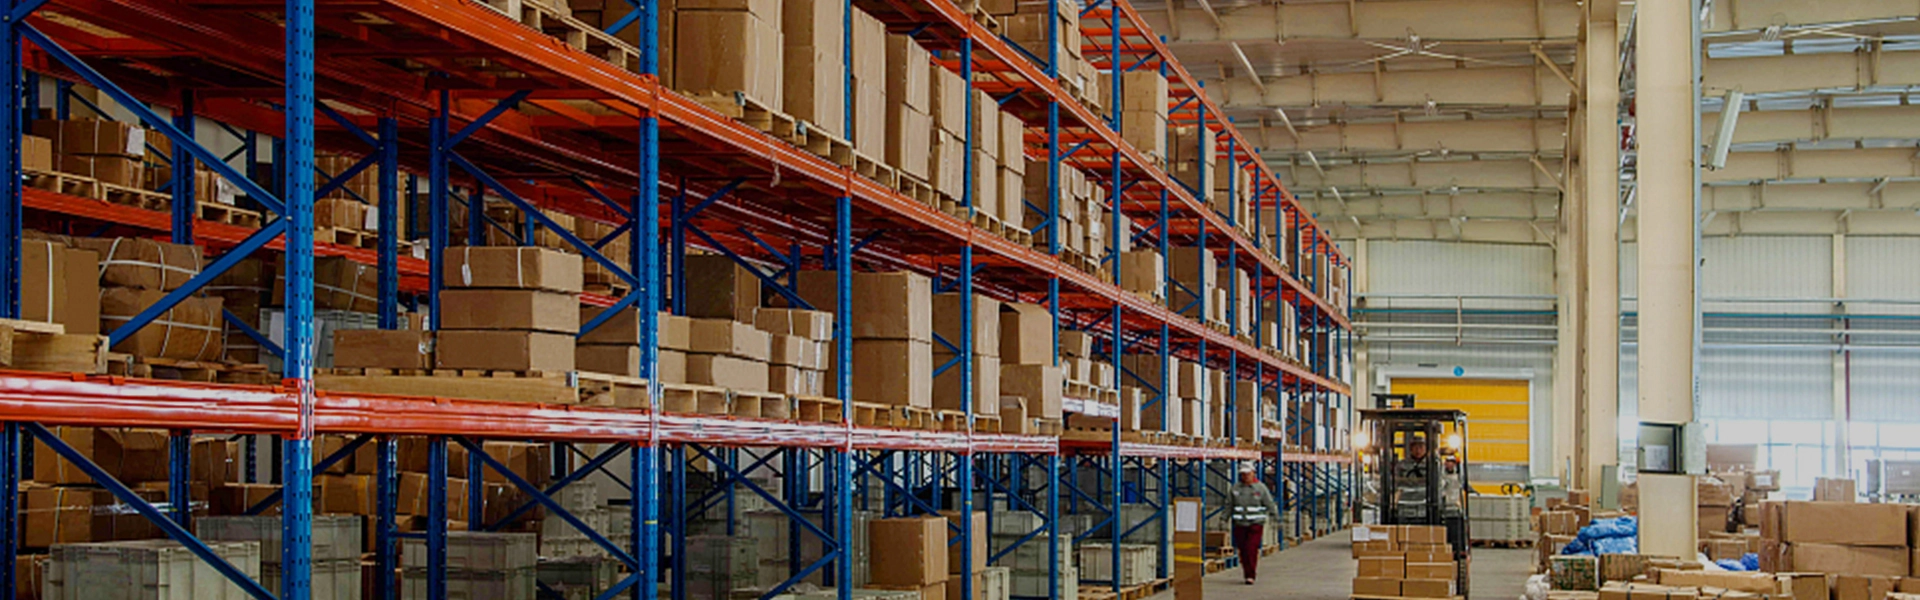 EAS & RFID Products in Warehouse & Distribution